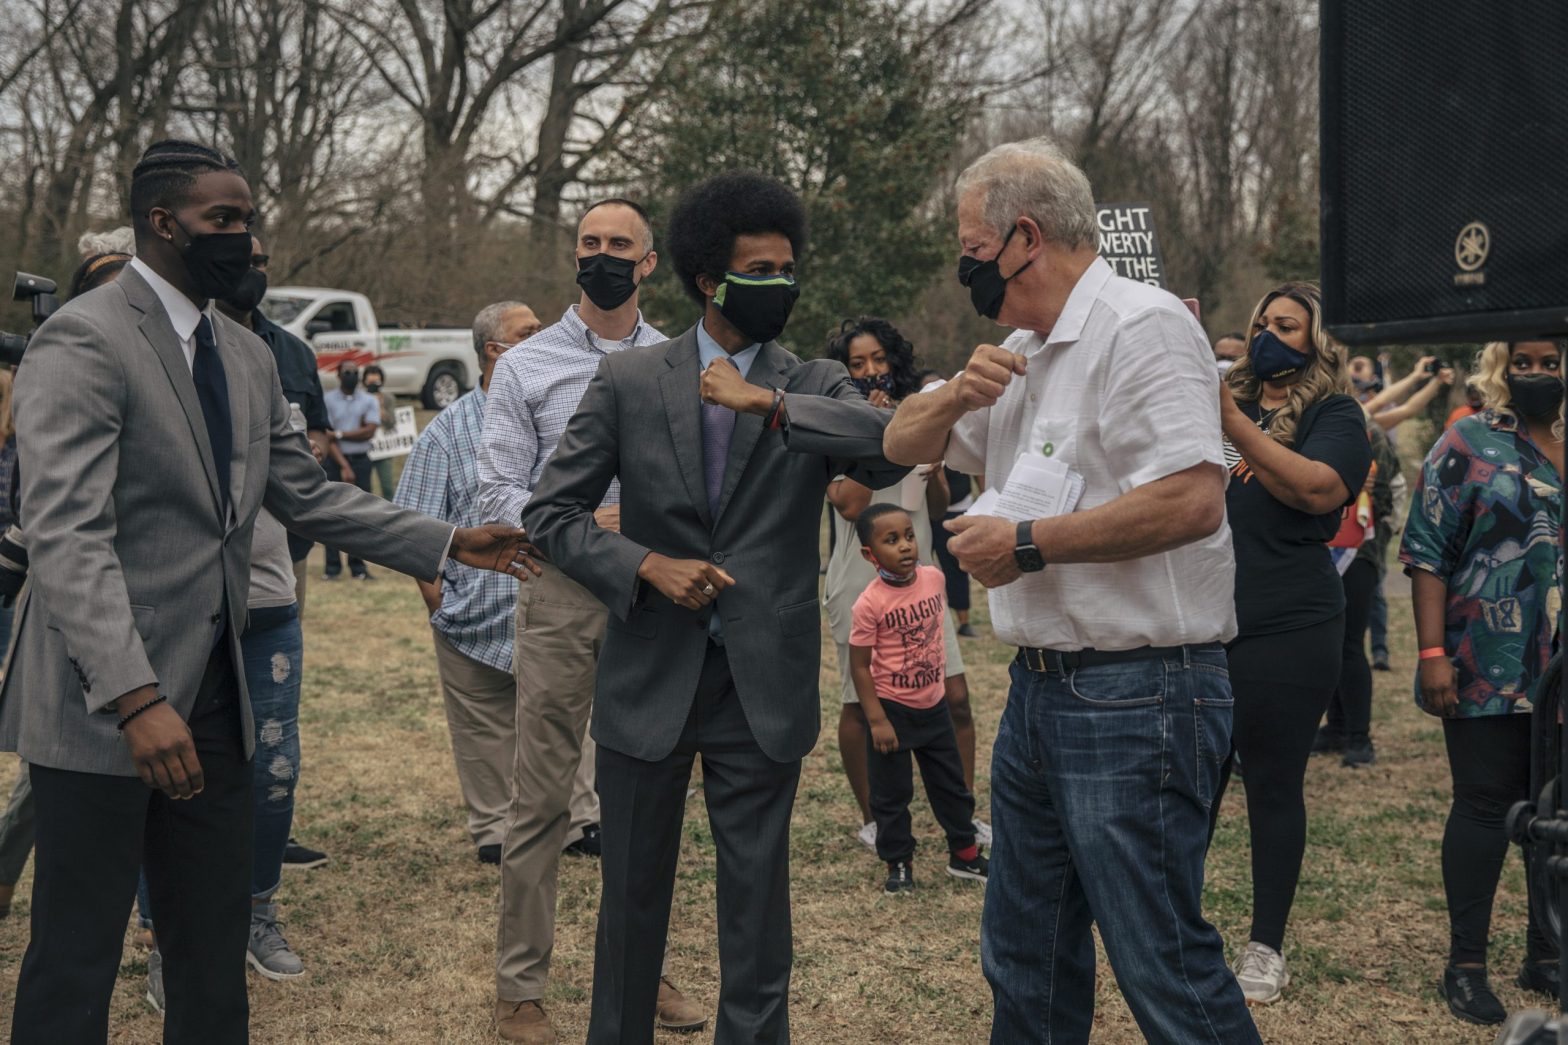 Justin J. Pearson, an organizer Memphis Community Against the Pipeline bumps elbows with former Vice President Al Gore after his speech during a rally organized by MCAP at Alonzo Weaver Park on Sunday afternoon. (Photo: Andrea Morales for MLK50)